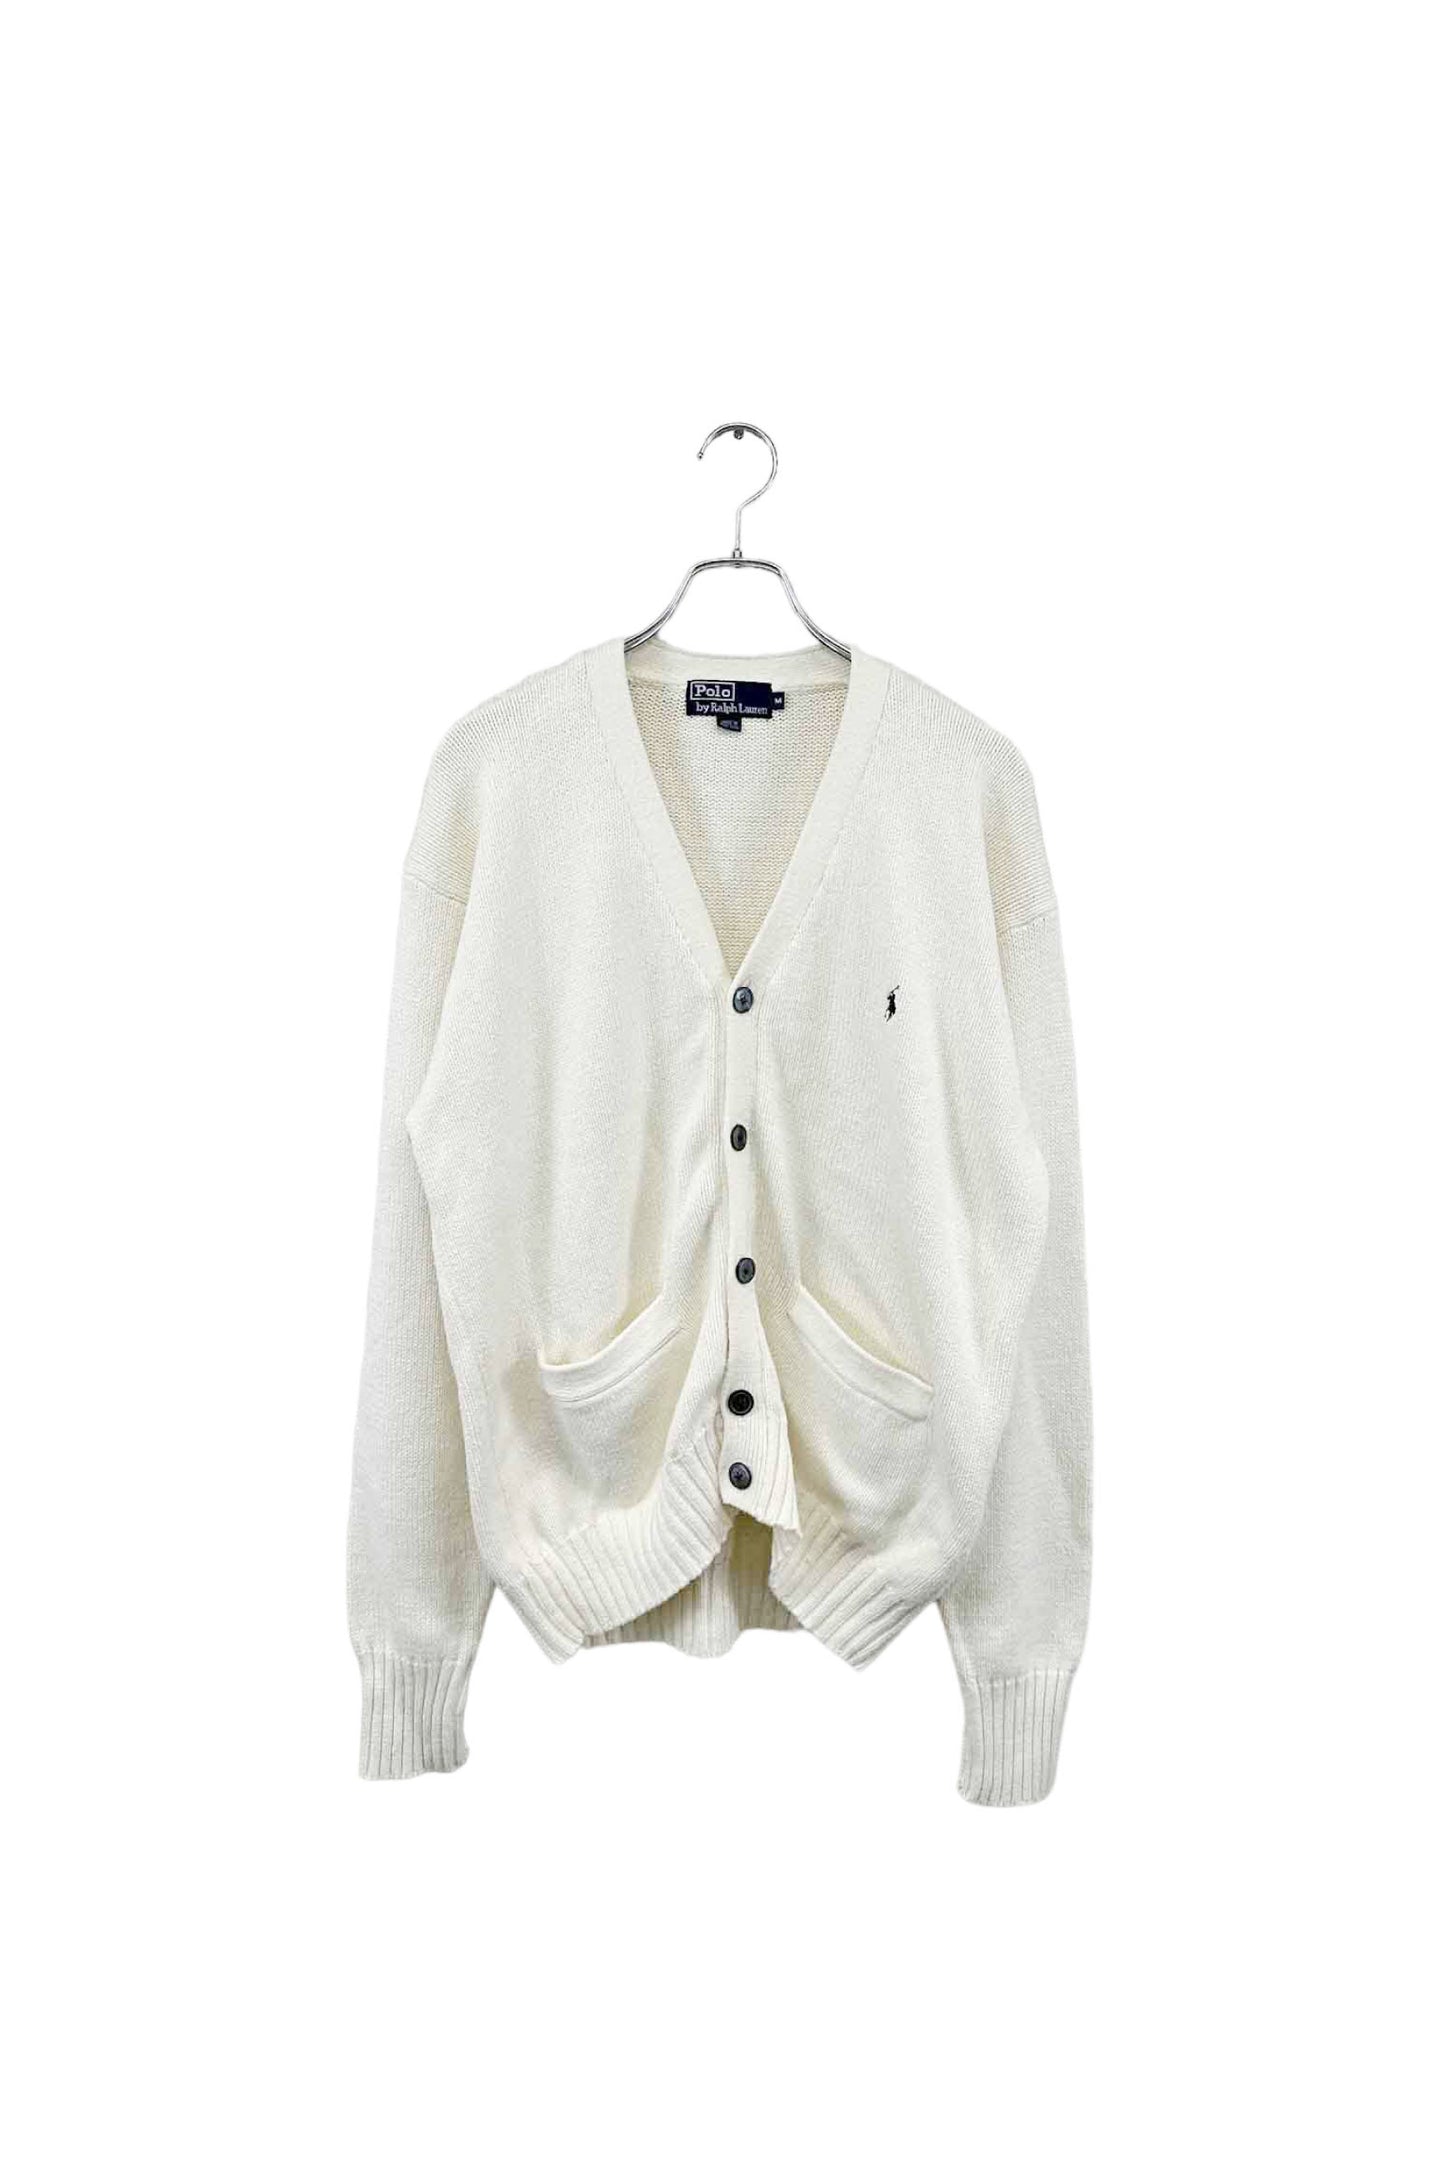 90's Polo by Ralph Lauren white cotton cardigan